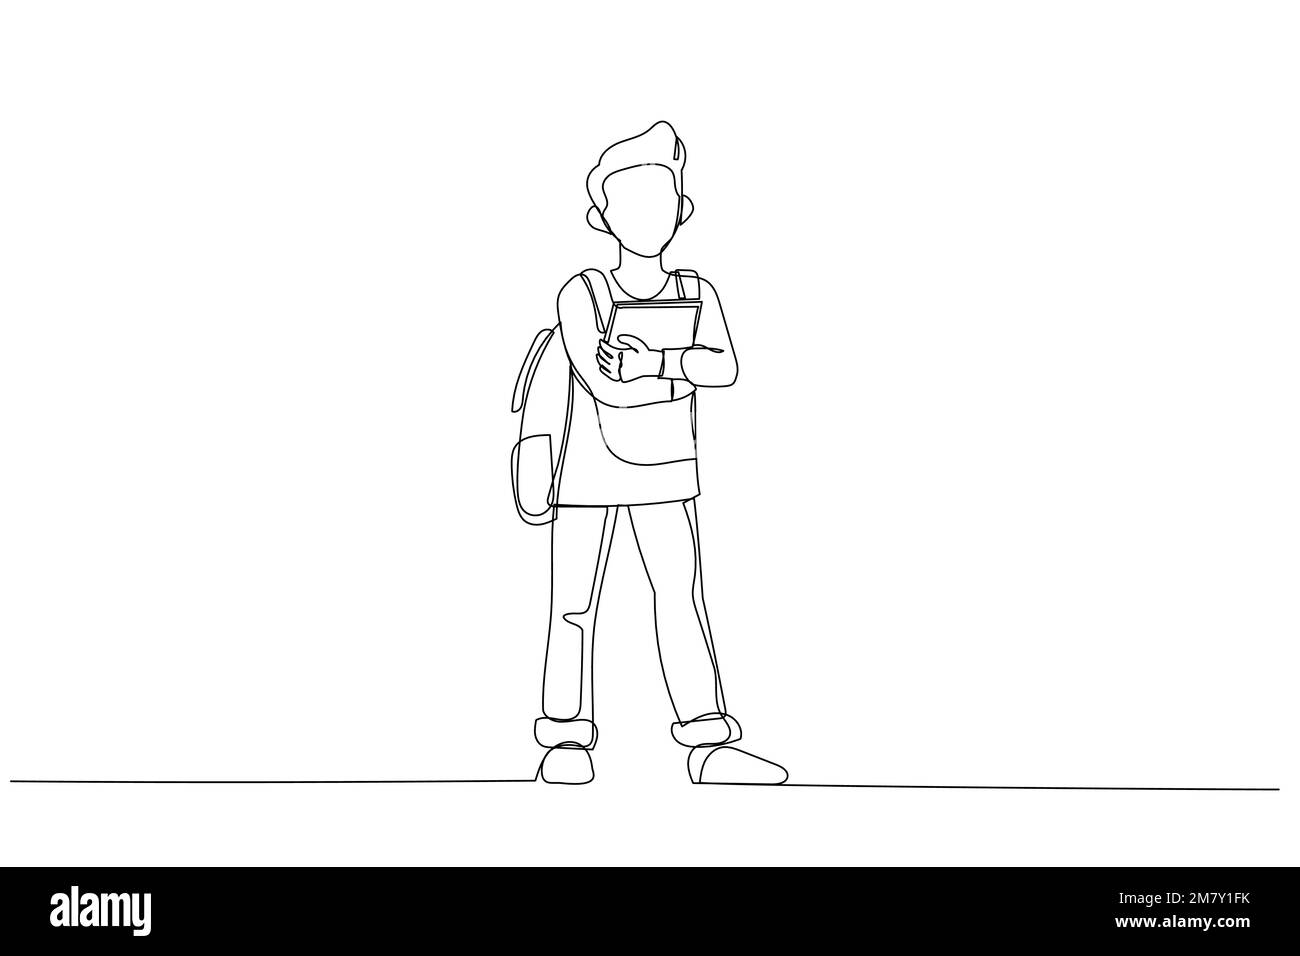 Cartoon of young boy standing and holding books. One line art style Stock Vector